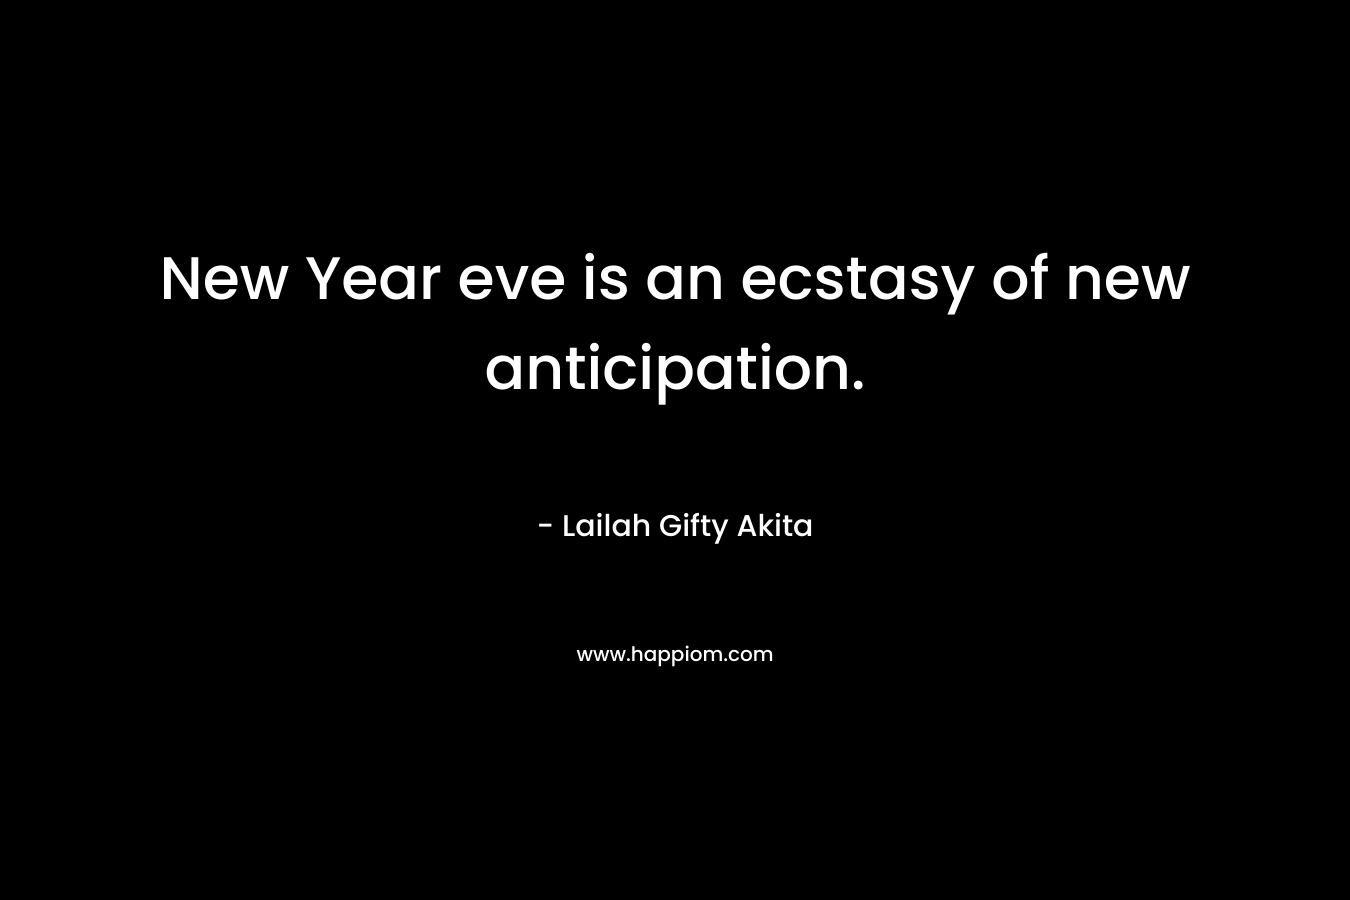 New Year eve is an ecstasy of new anticipation.